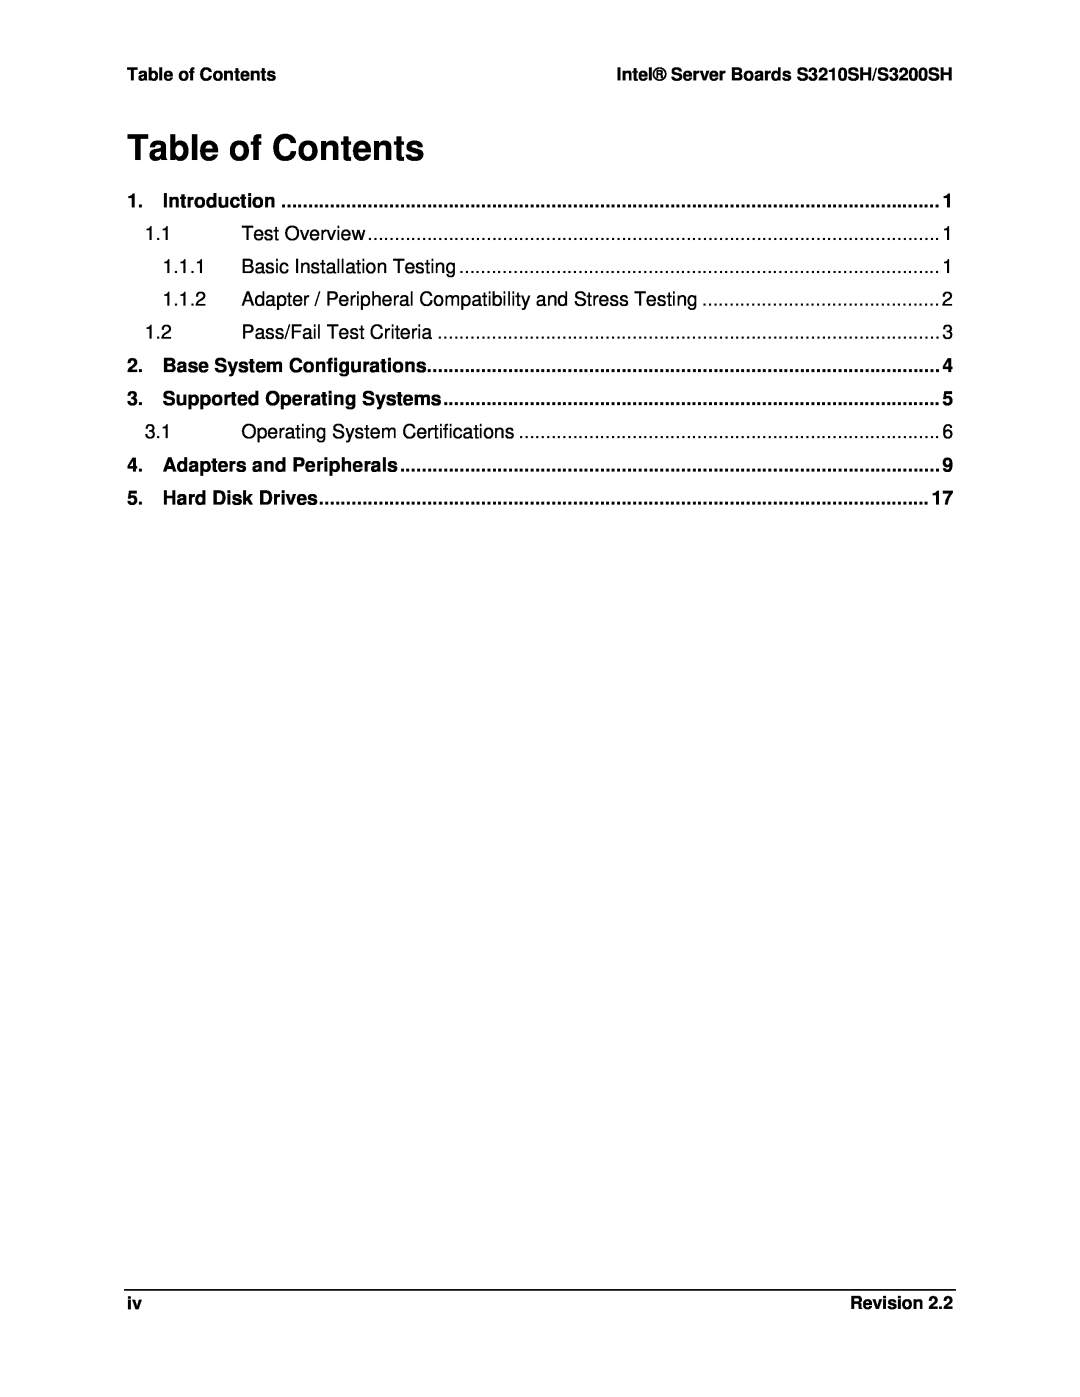 Intel S3200SH, S3210SH manual Table of Contents 